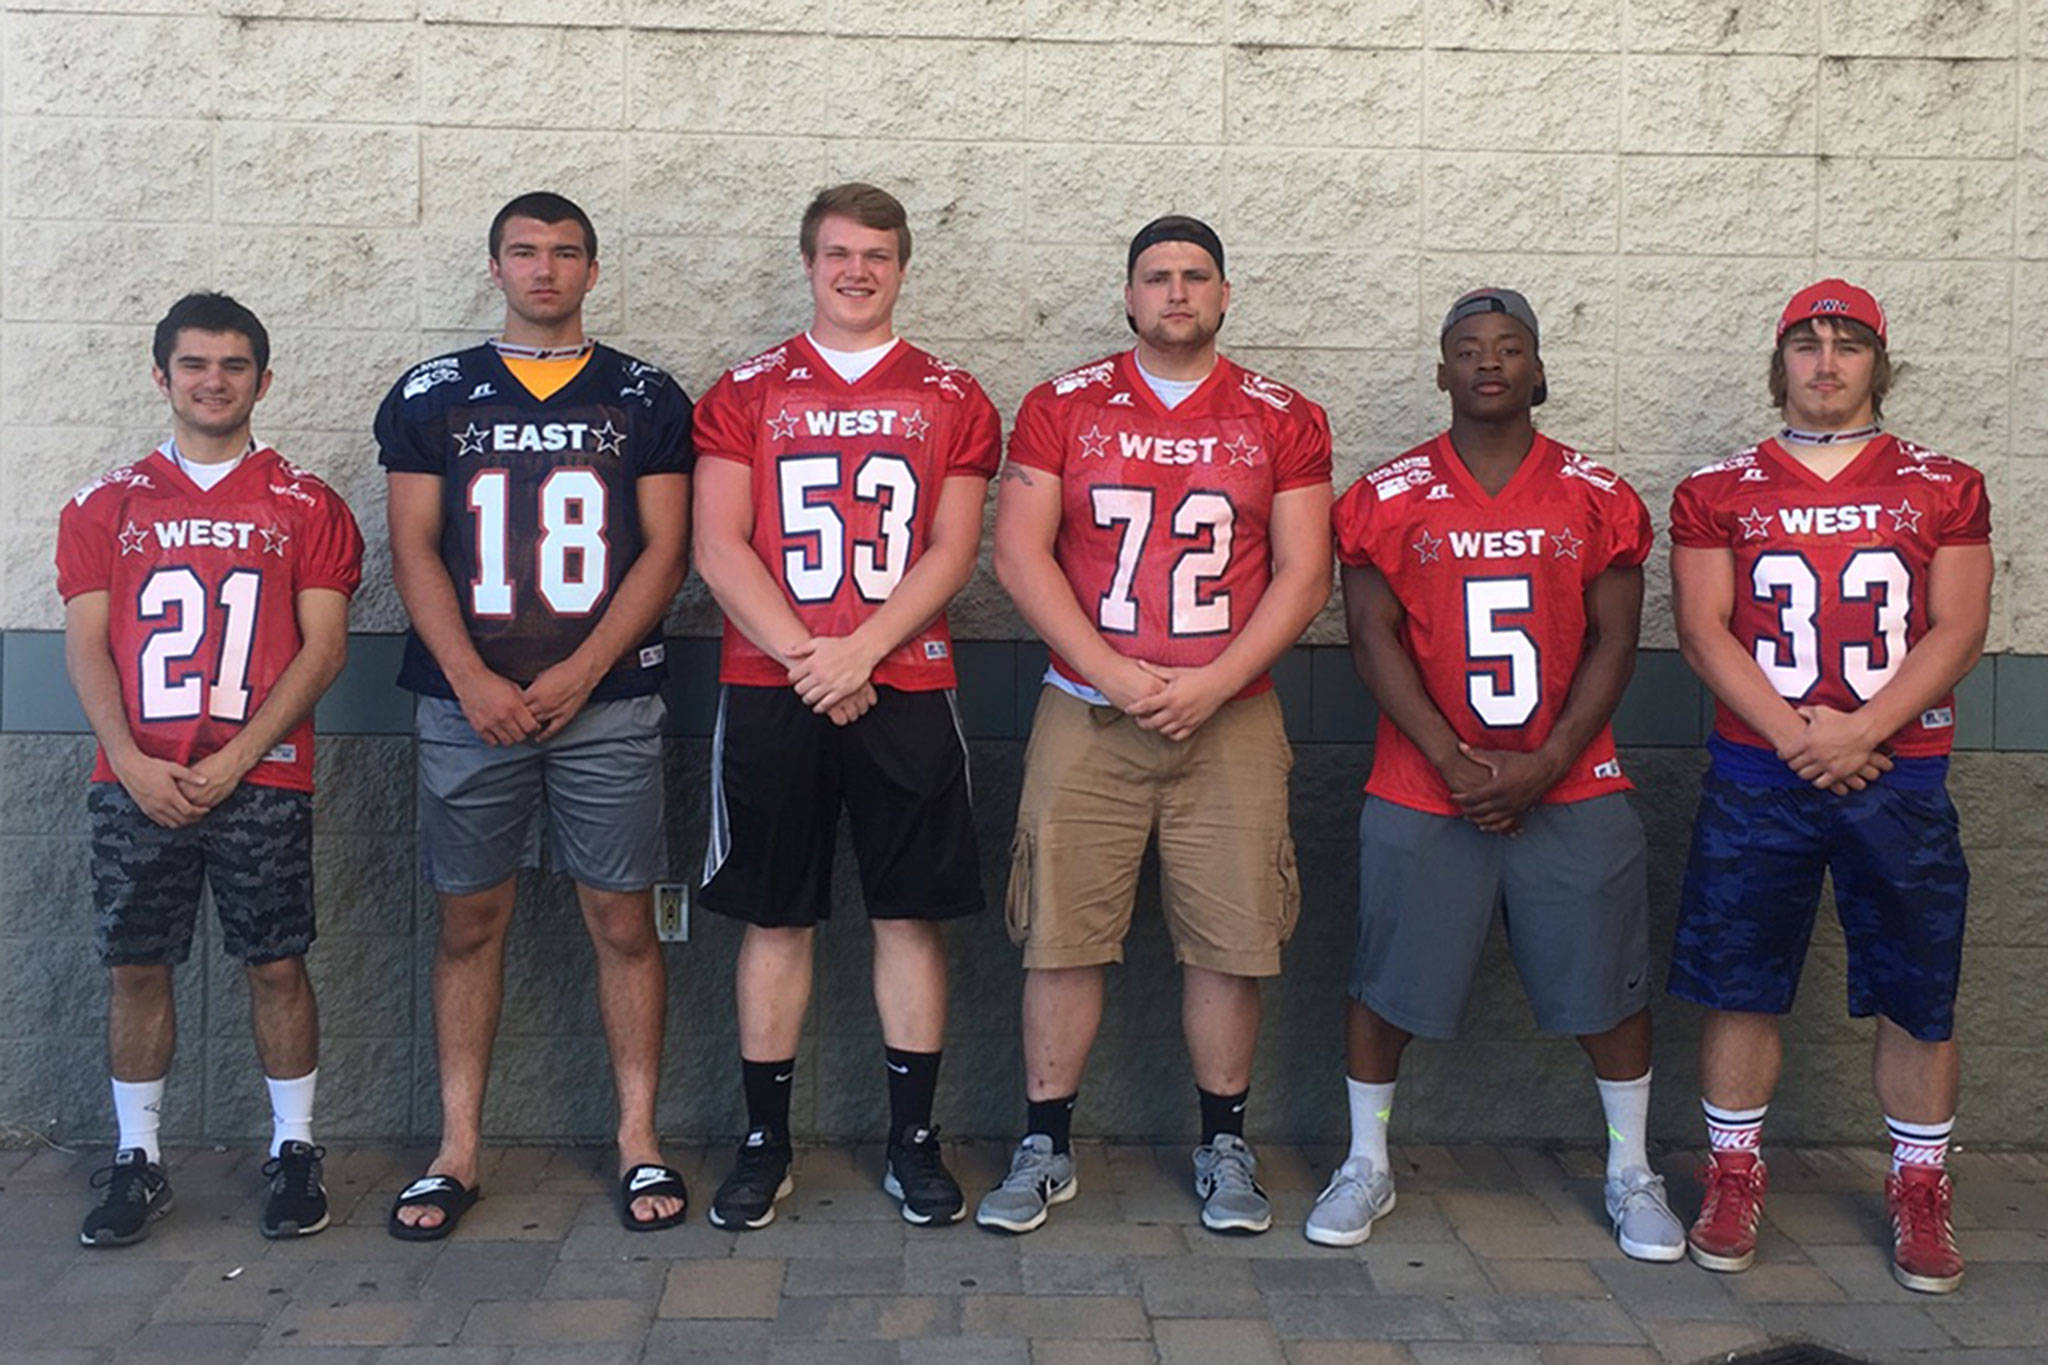 (Tom Sanchez) Six Twin Harbor high school football players participated in Saturday’s Earl Barden East-West All-Star Classic in Yakima on Saturday. The players were (from left) South Bend’s A.J. Sanchez, Aberdeen’s Braden Castleberry-Taylor, Raymond’s Luke Hamilton, Montesano’s Taylor Rupe, Hoquiam’s Artimus Johnson and Pe Ell-Willapa Valley’s Kaelin Jurek.